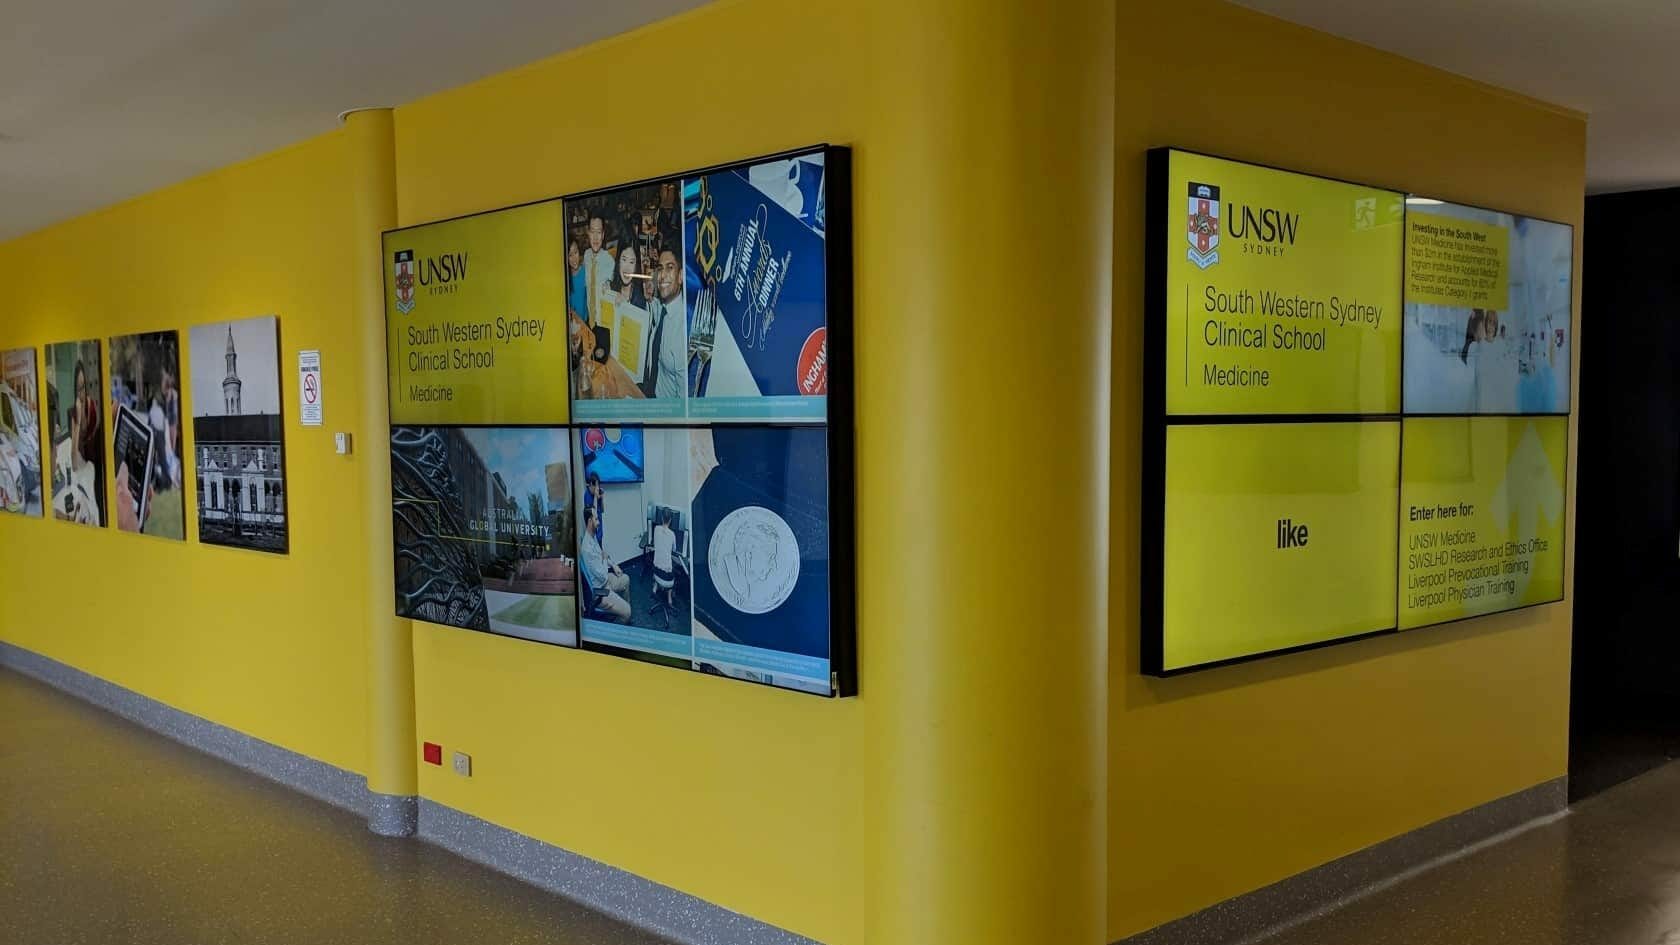 Video Wall & Social Wall – UNSW